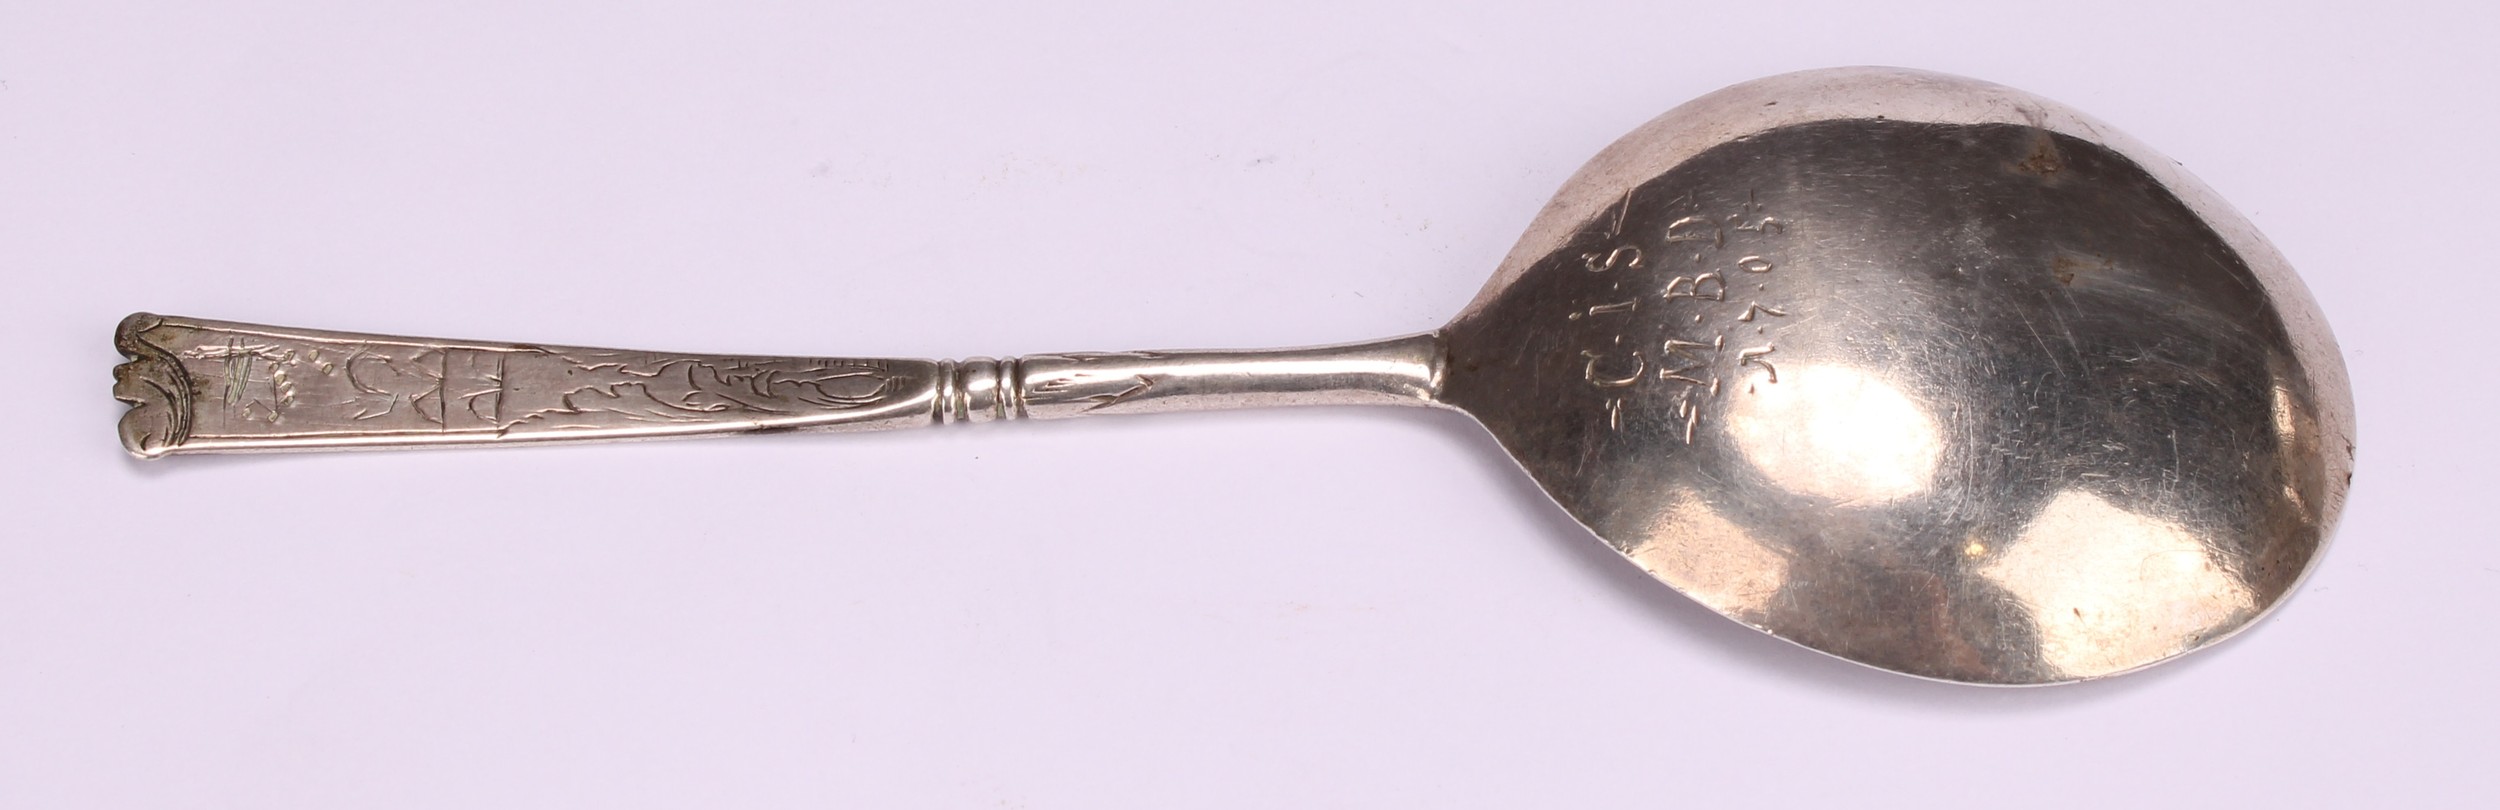 An early 18th century silver spoon, probably Norwegian, the stem engraved with a flower on a - Image 3 of 4